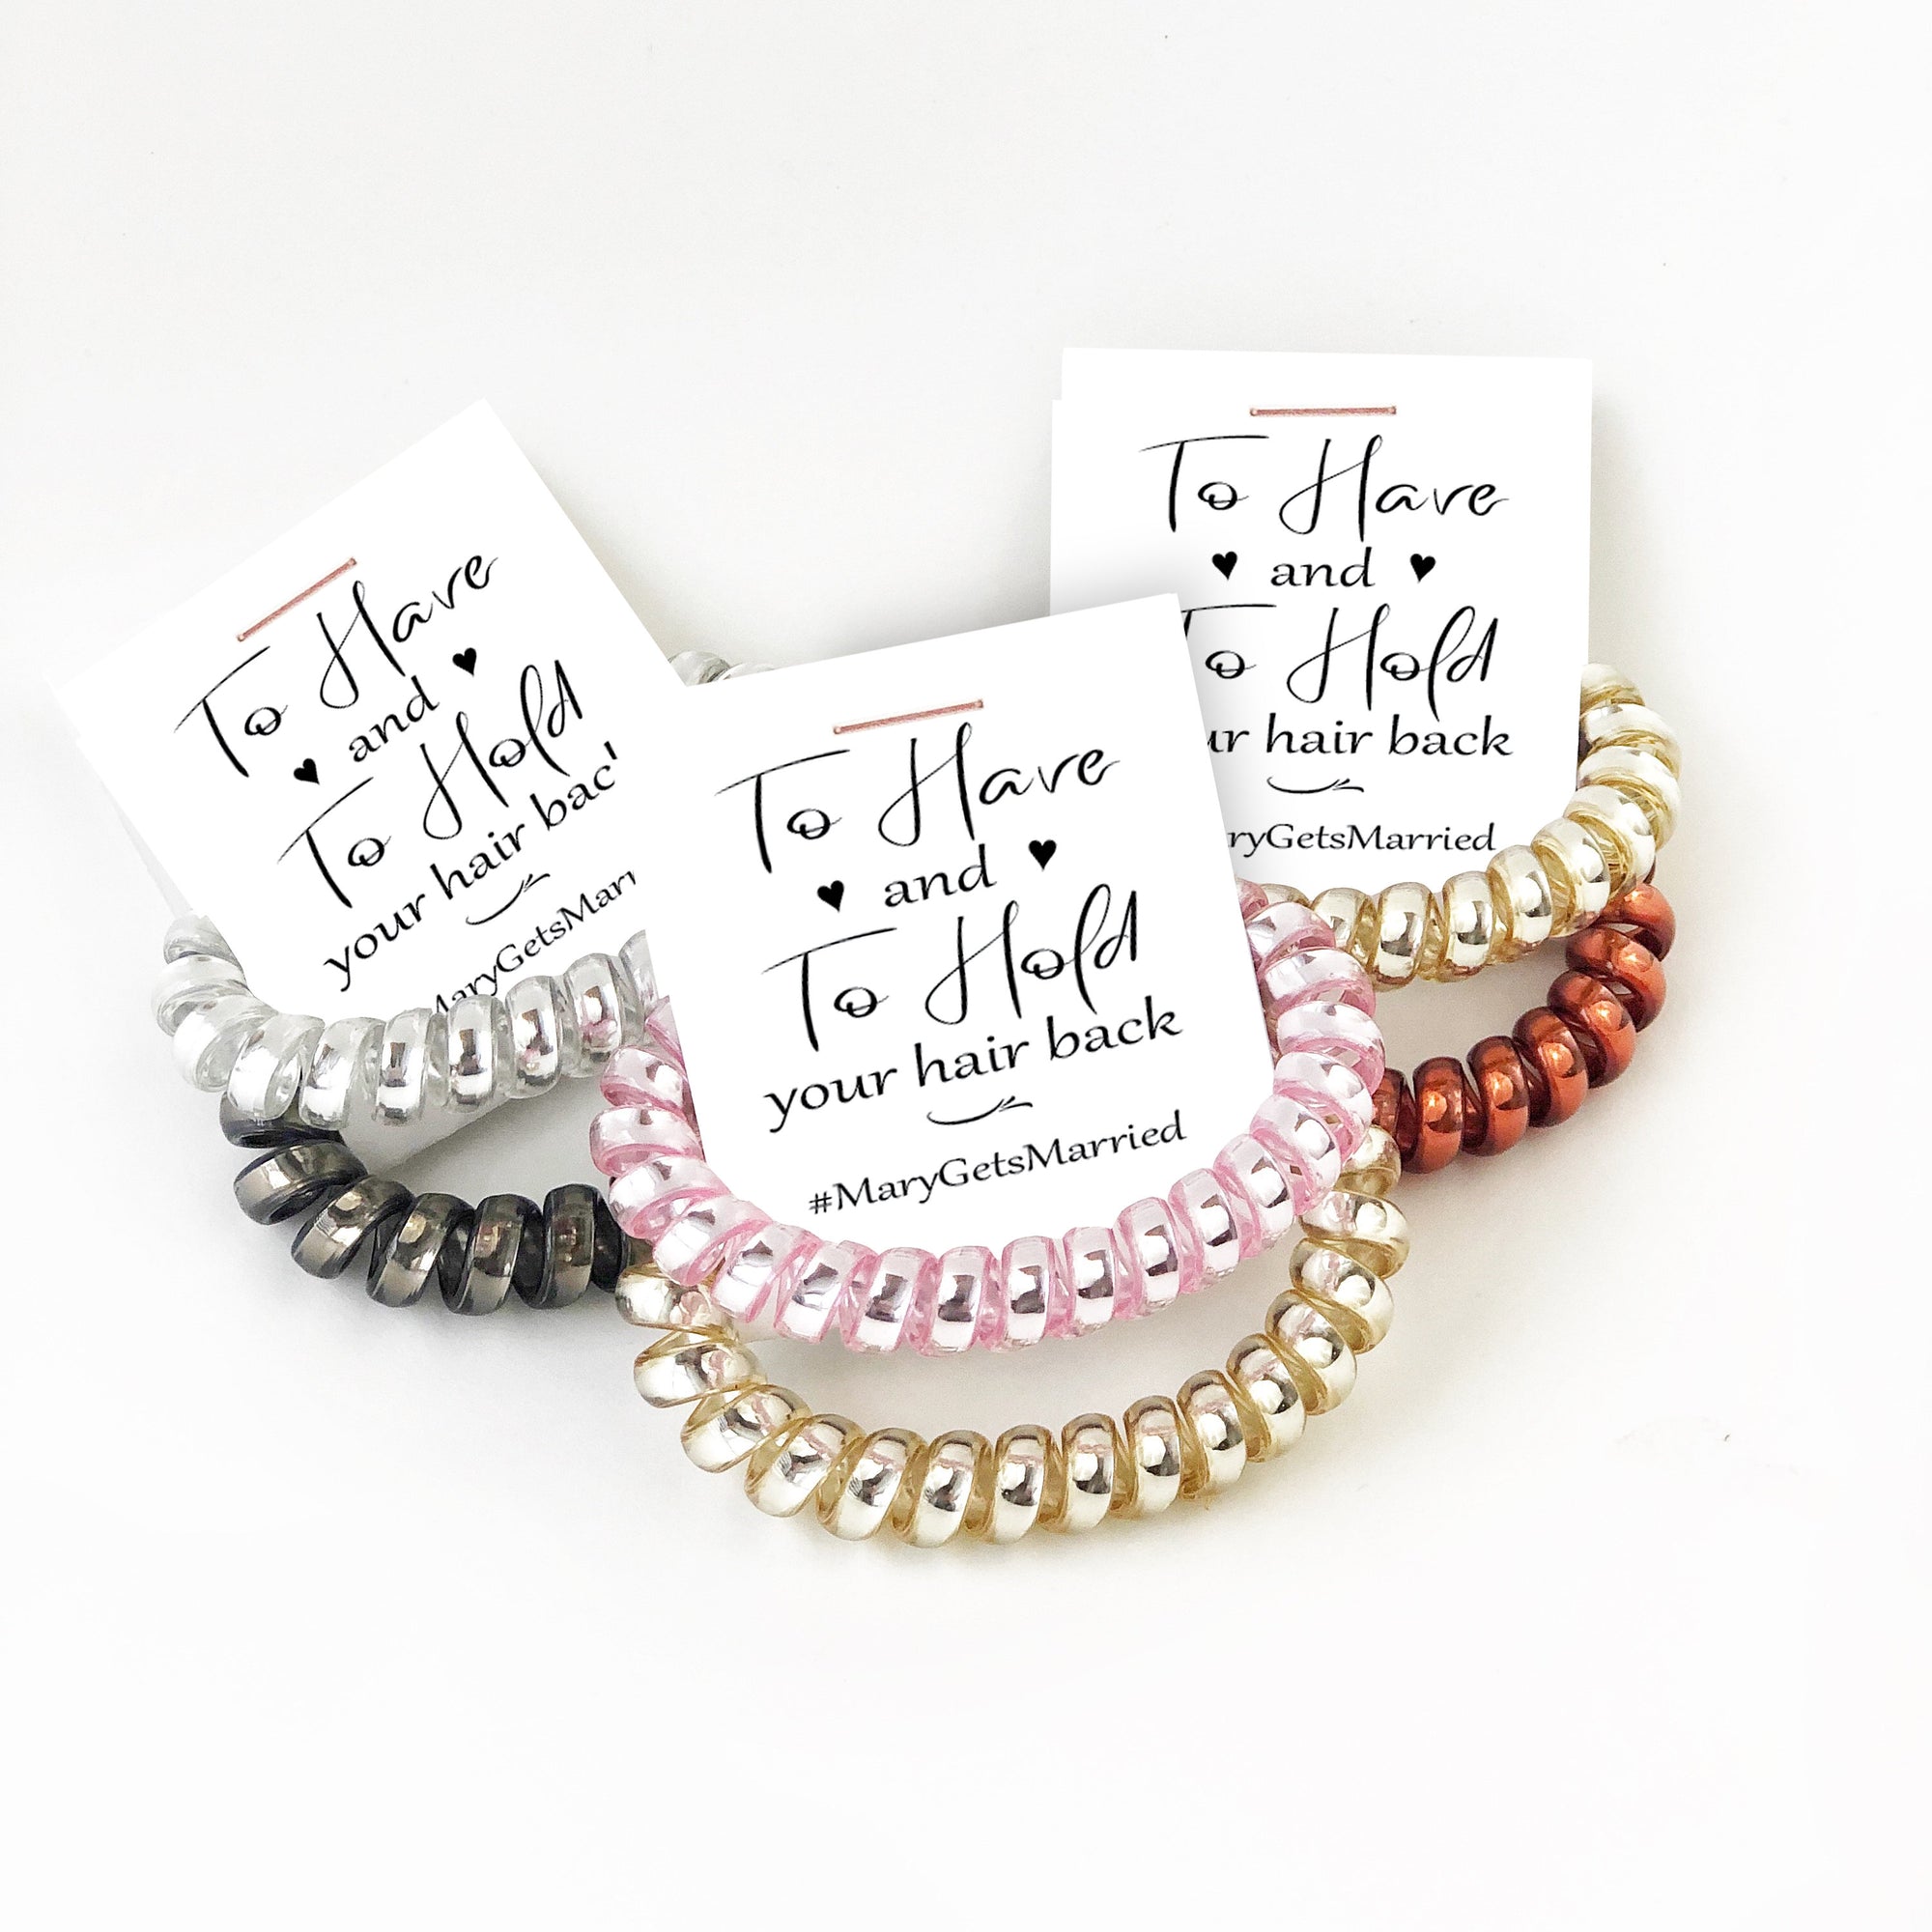 To Have and To Hold Your Hair Back Bridal Shower Favors, Telephone Cord Spiral Hair Ties, Coil Hair Tie Bachelorette Favors - @PlumPolkaDot 